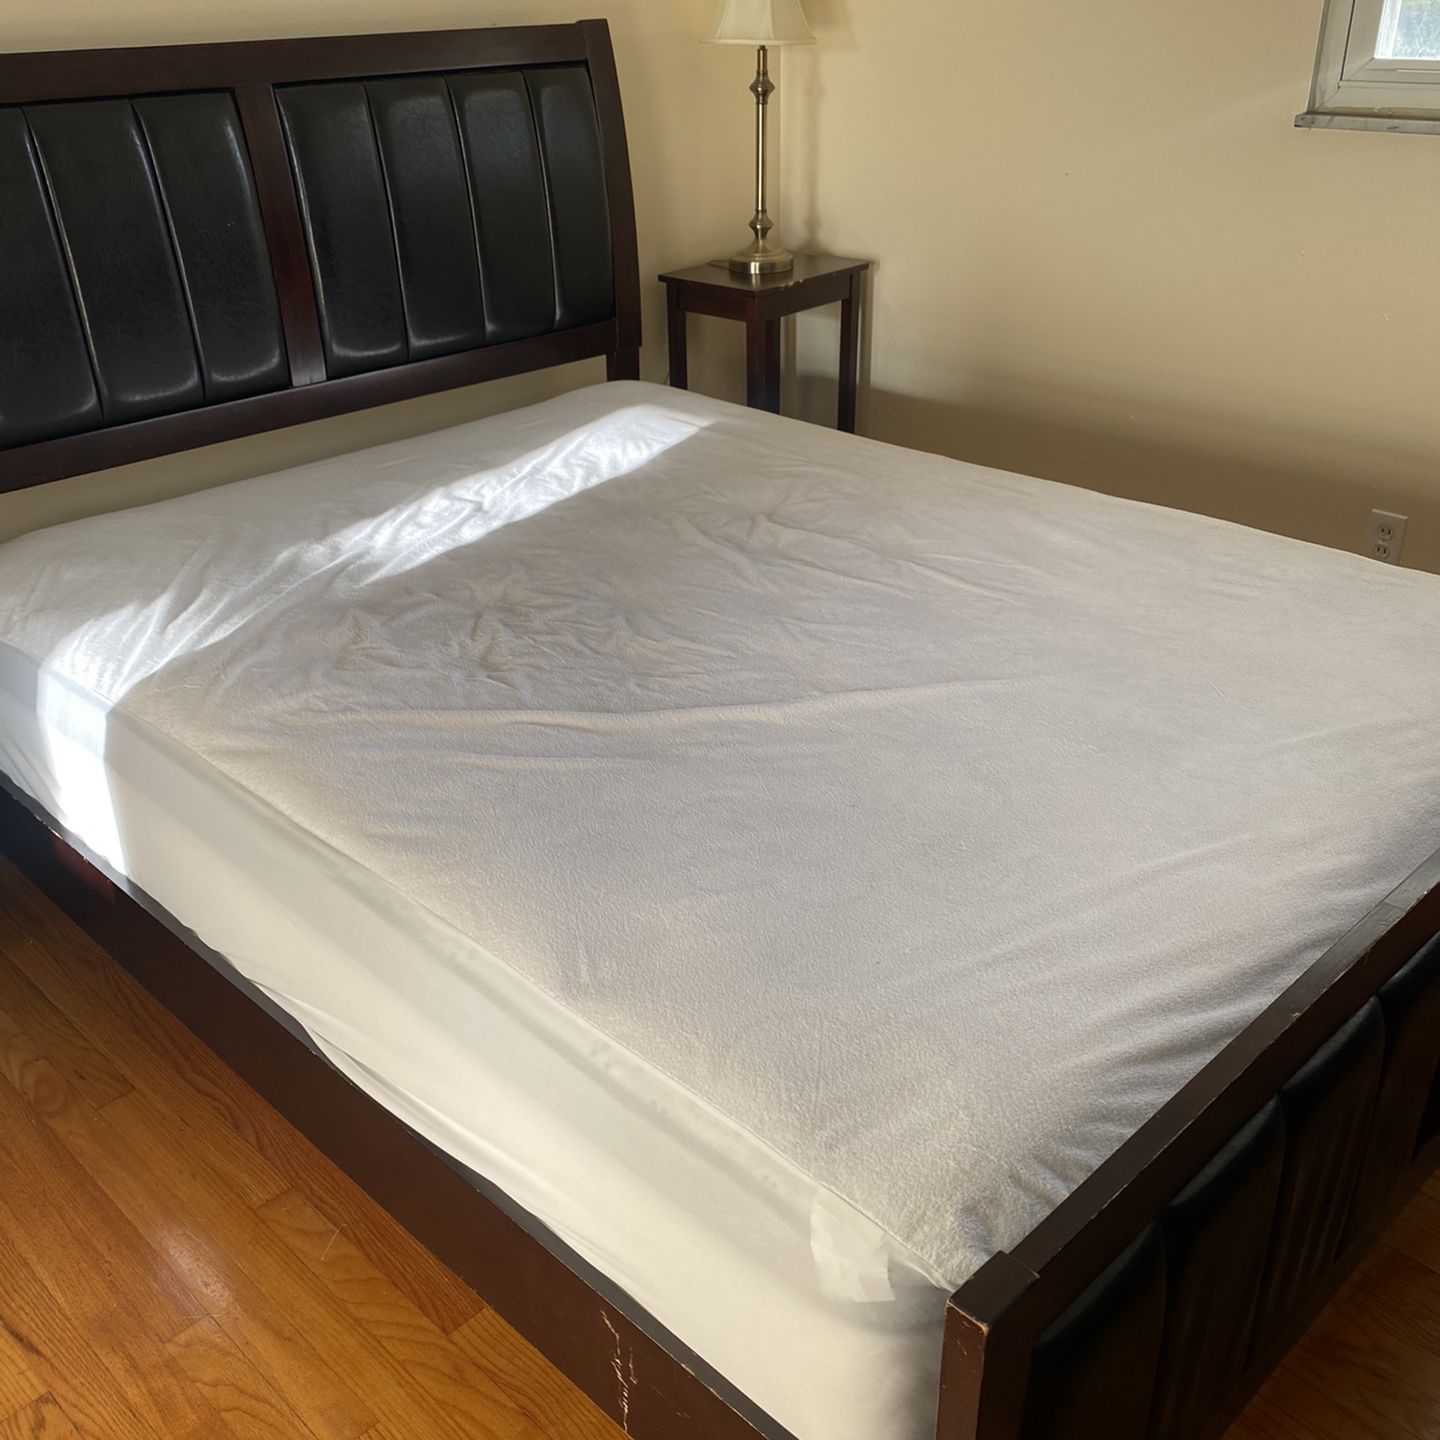 Queen size bed frame one night stand up and two